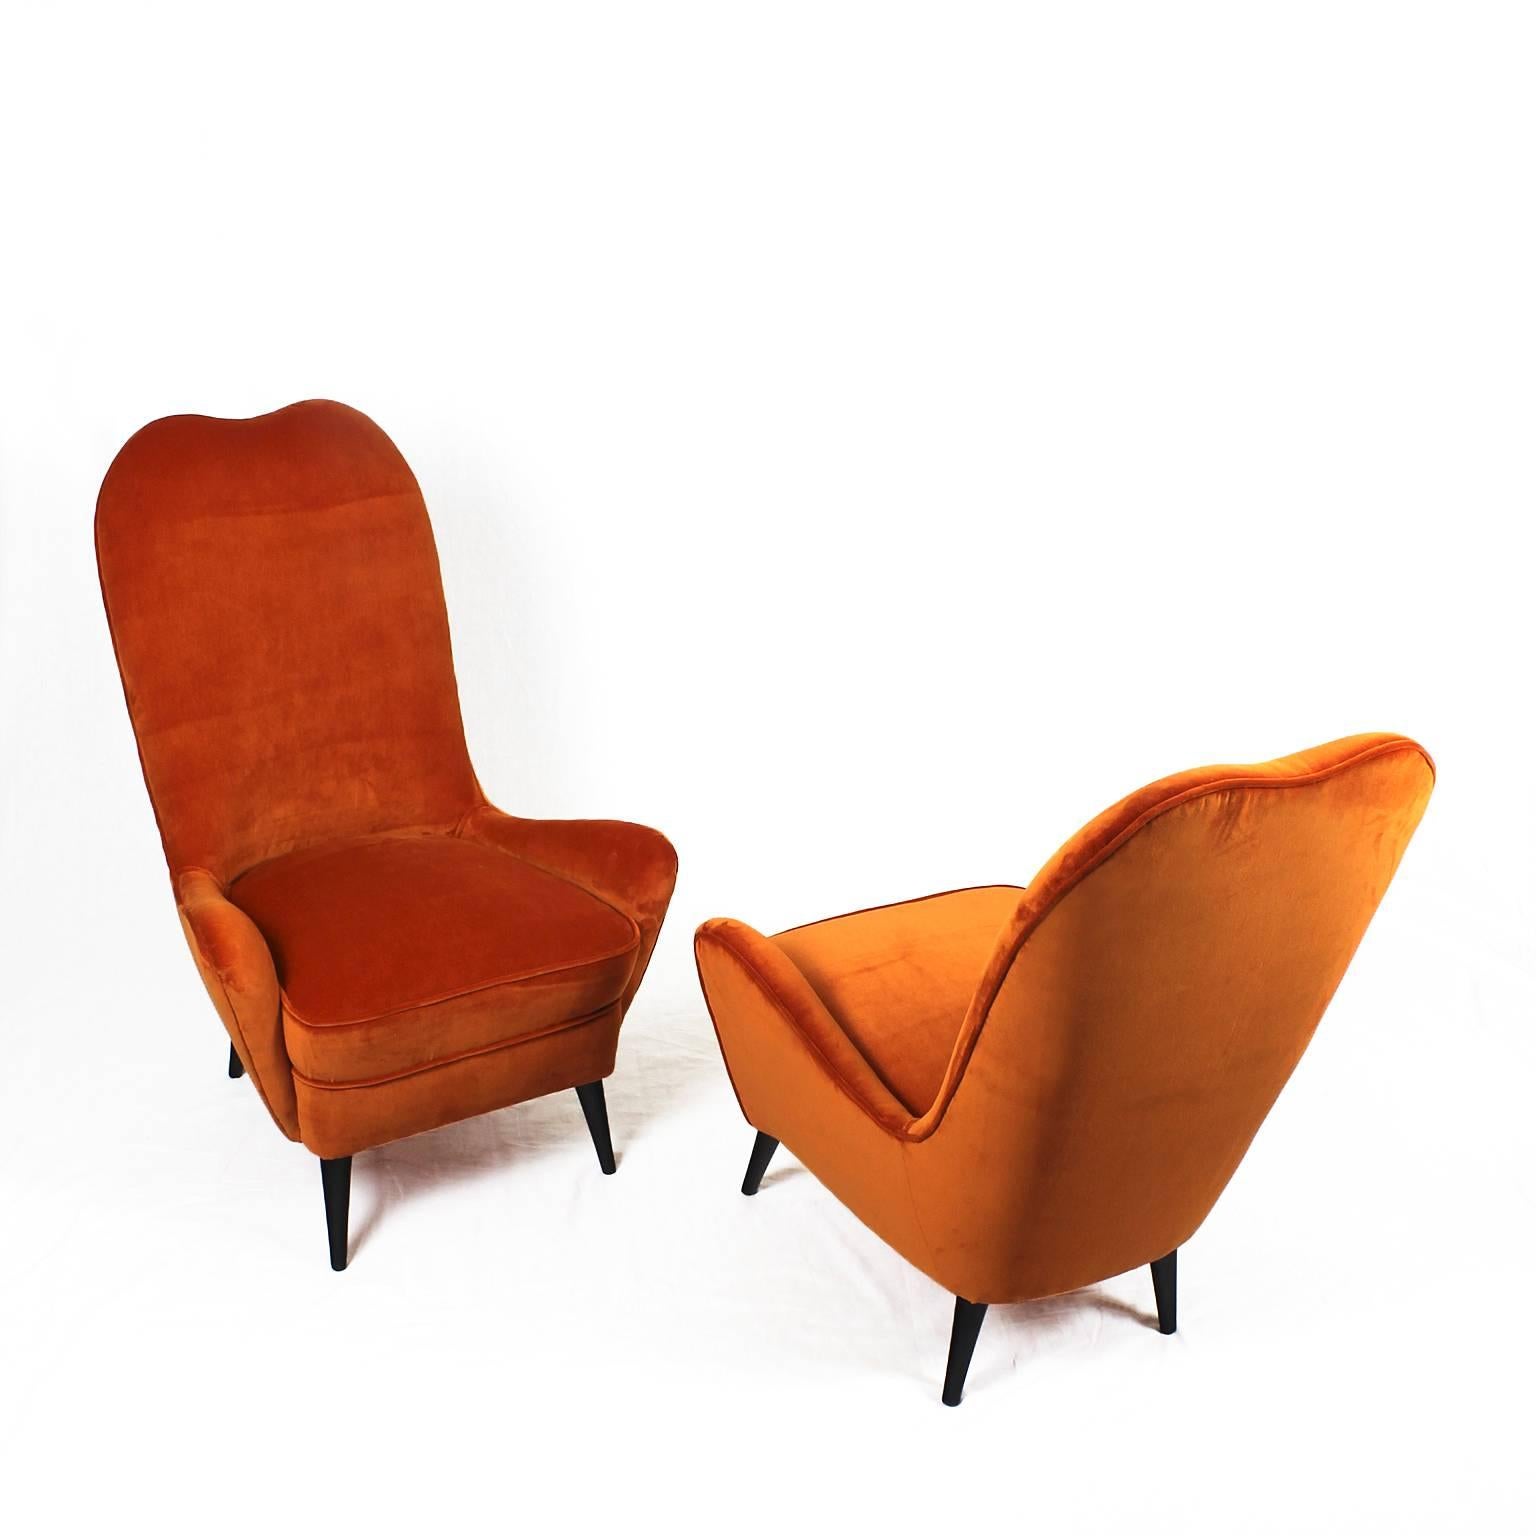 Mid-20th Century Pair of Small Bedroom Chairs